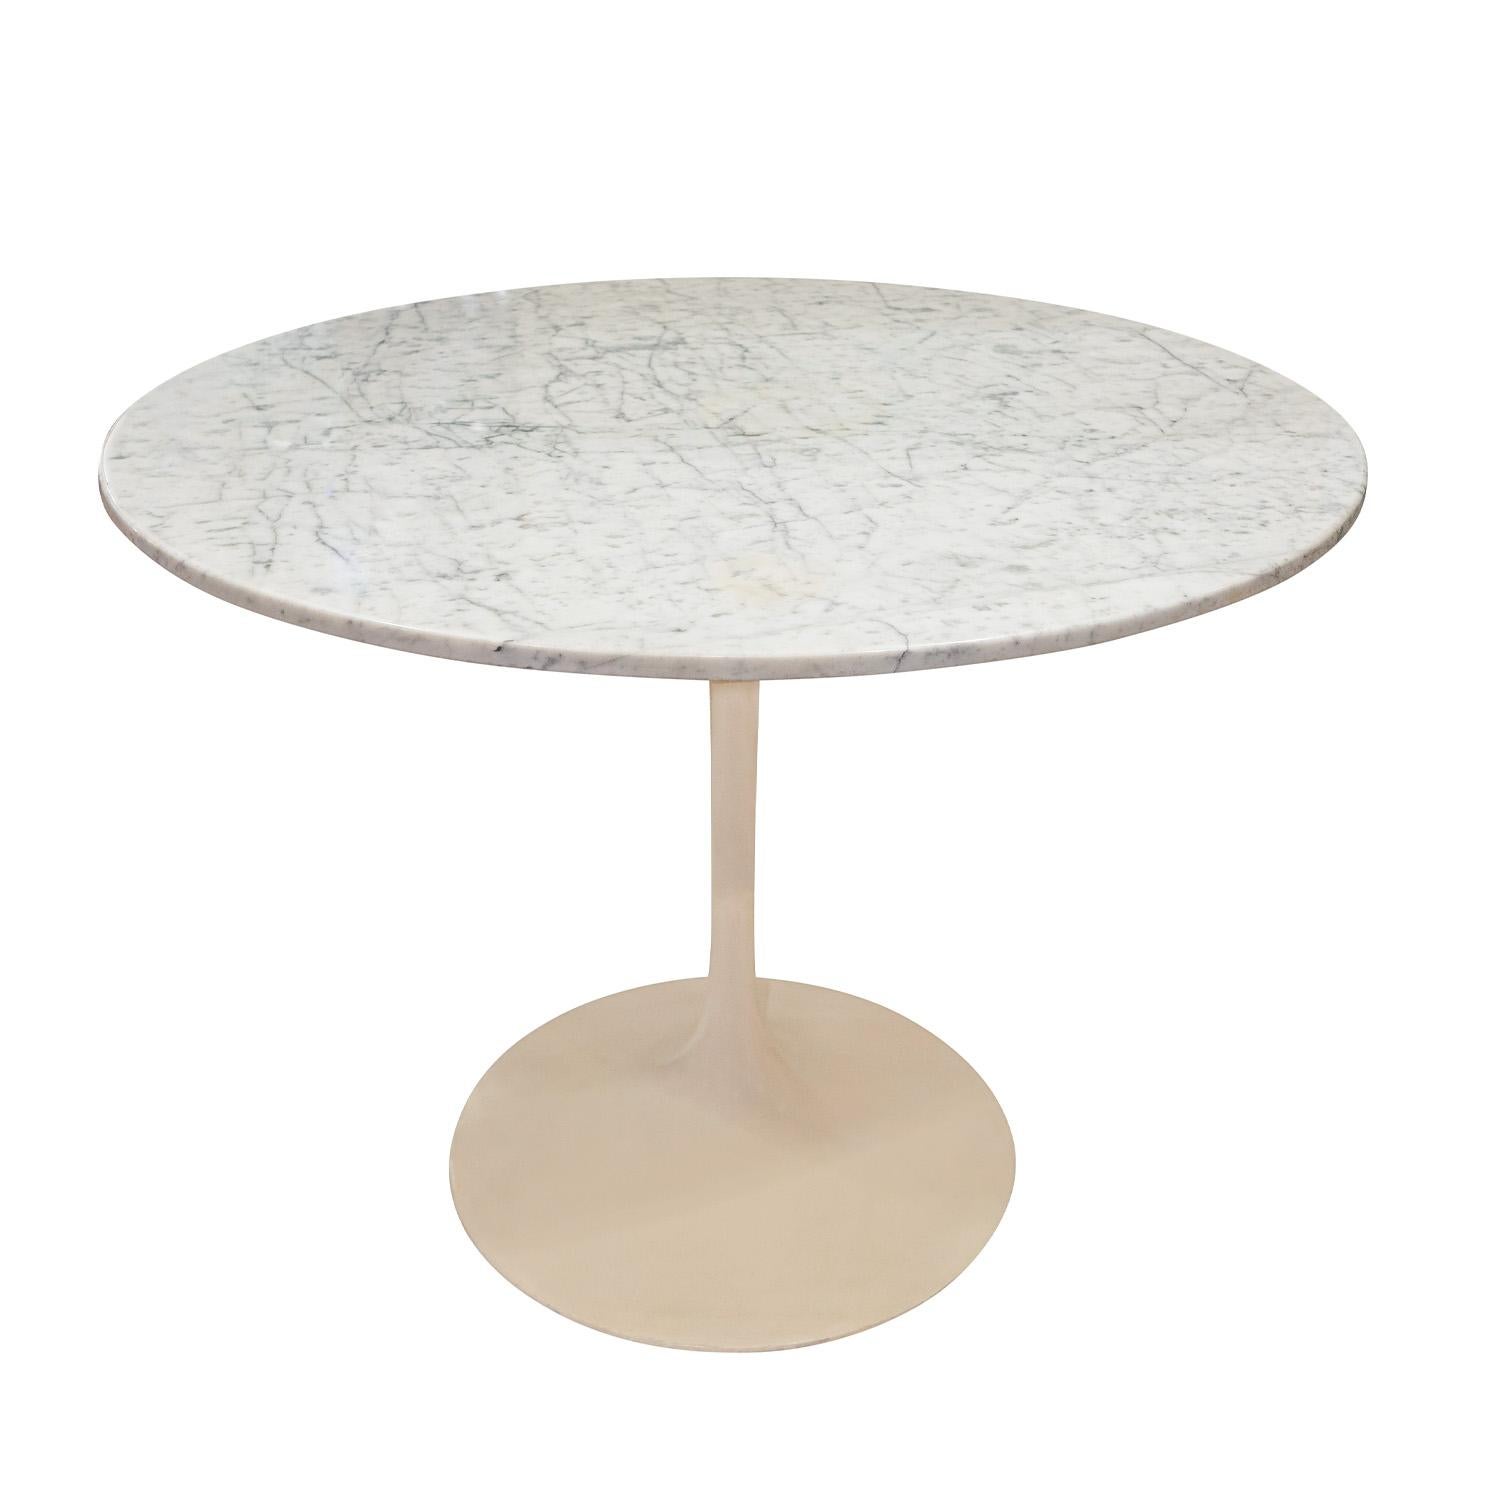 Saarinen Tulip style dining/game table with molded and lacquered steel base with custom polished marble top, Italian 1990's.  The figured marble top is stunning.